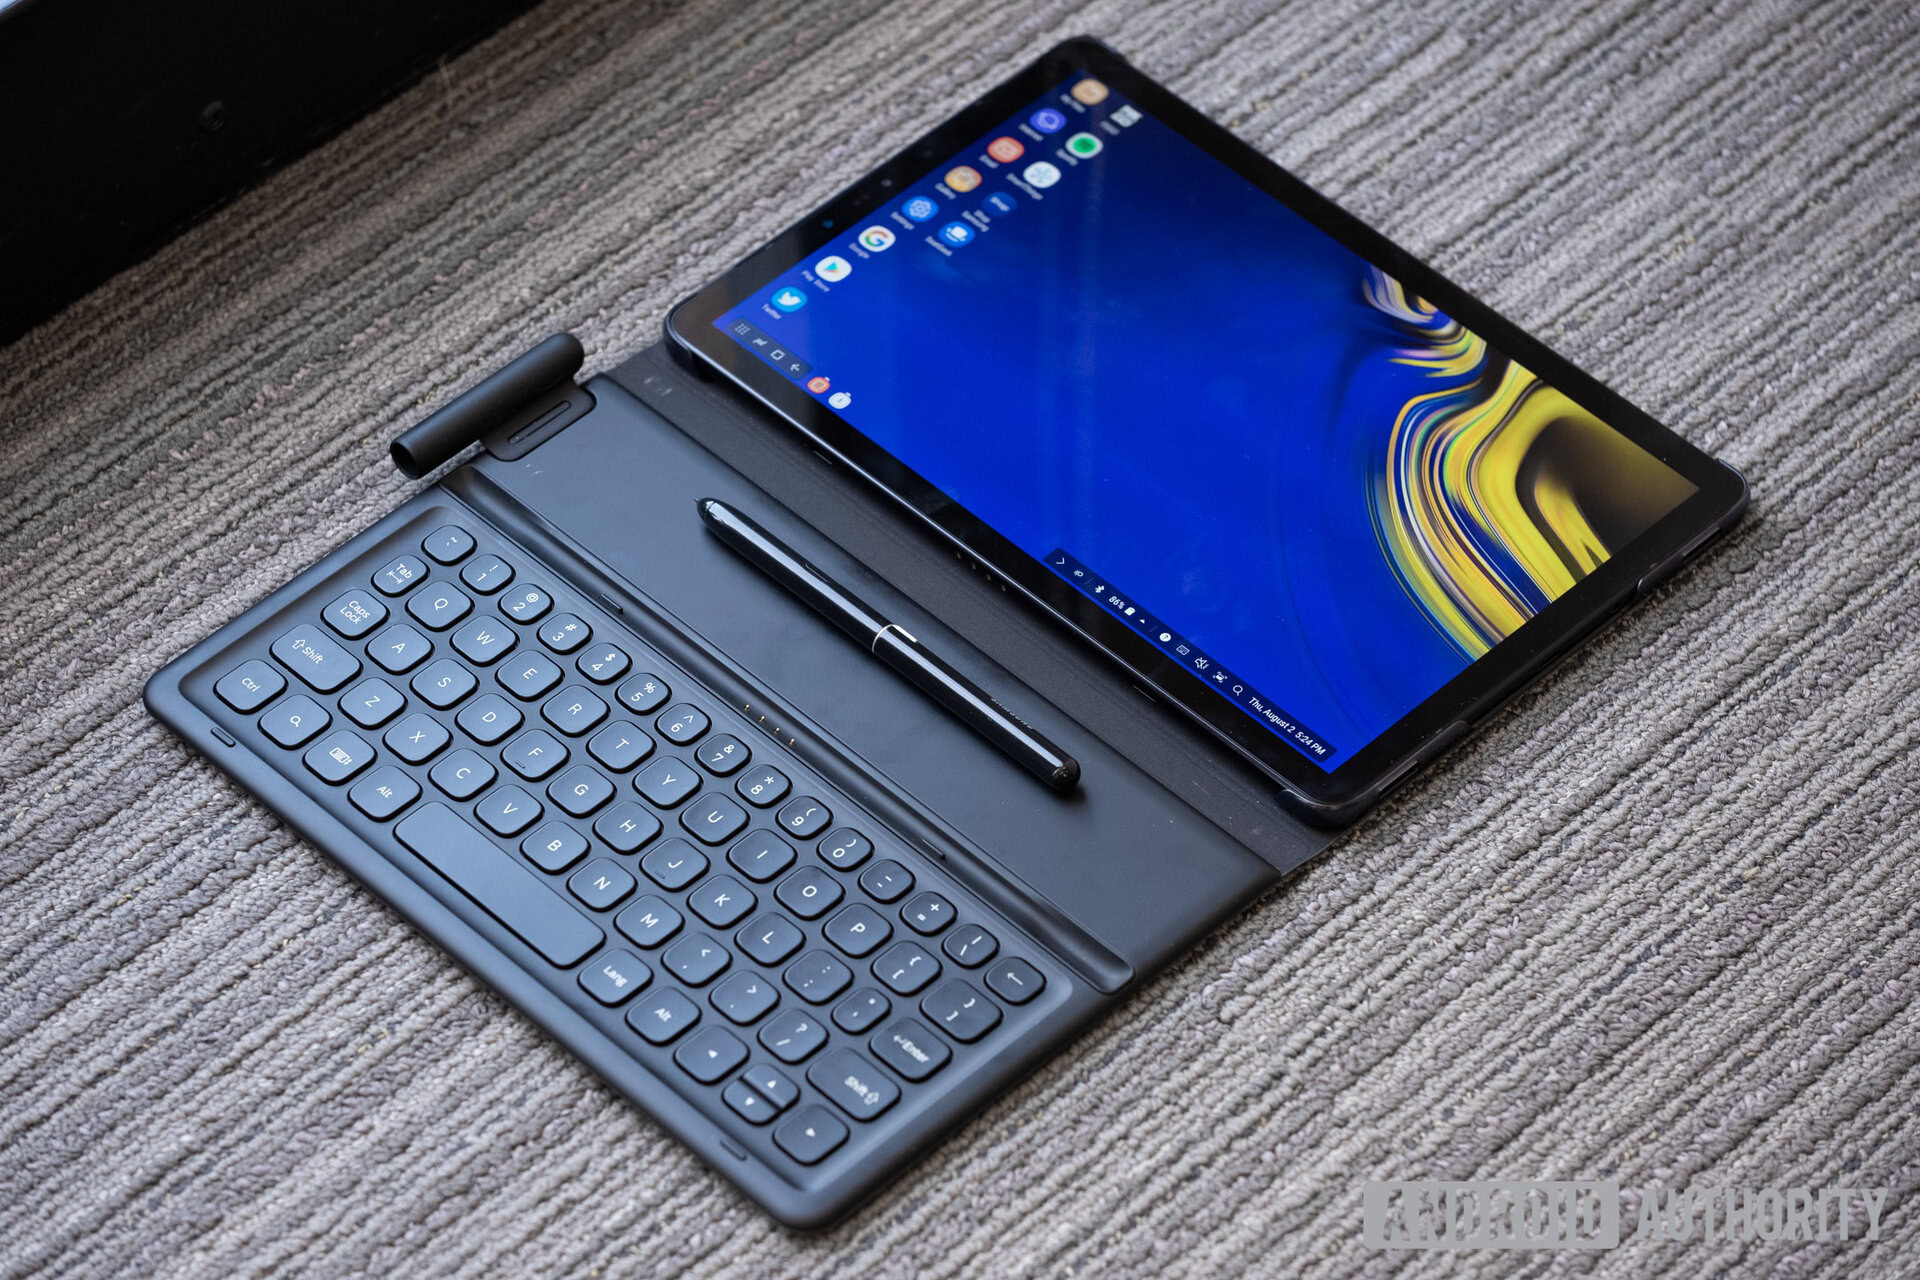 Samsung Galaxy Tab S4 hands-on: Dex gets to work Android Authority